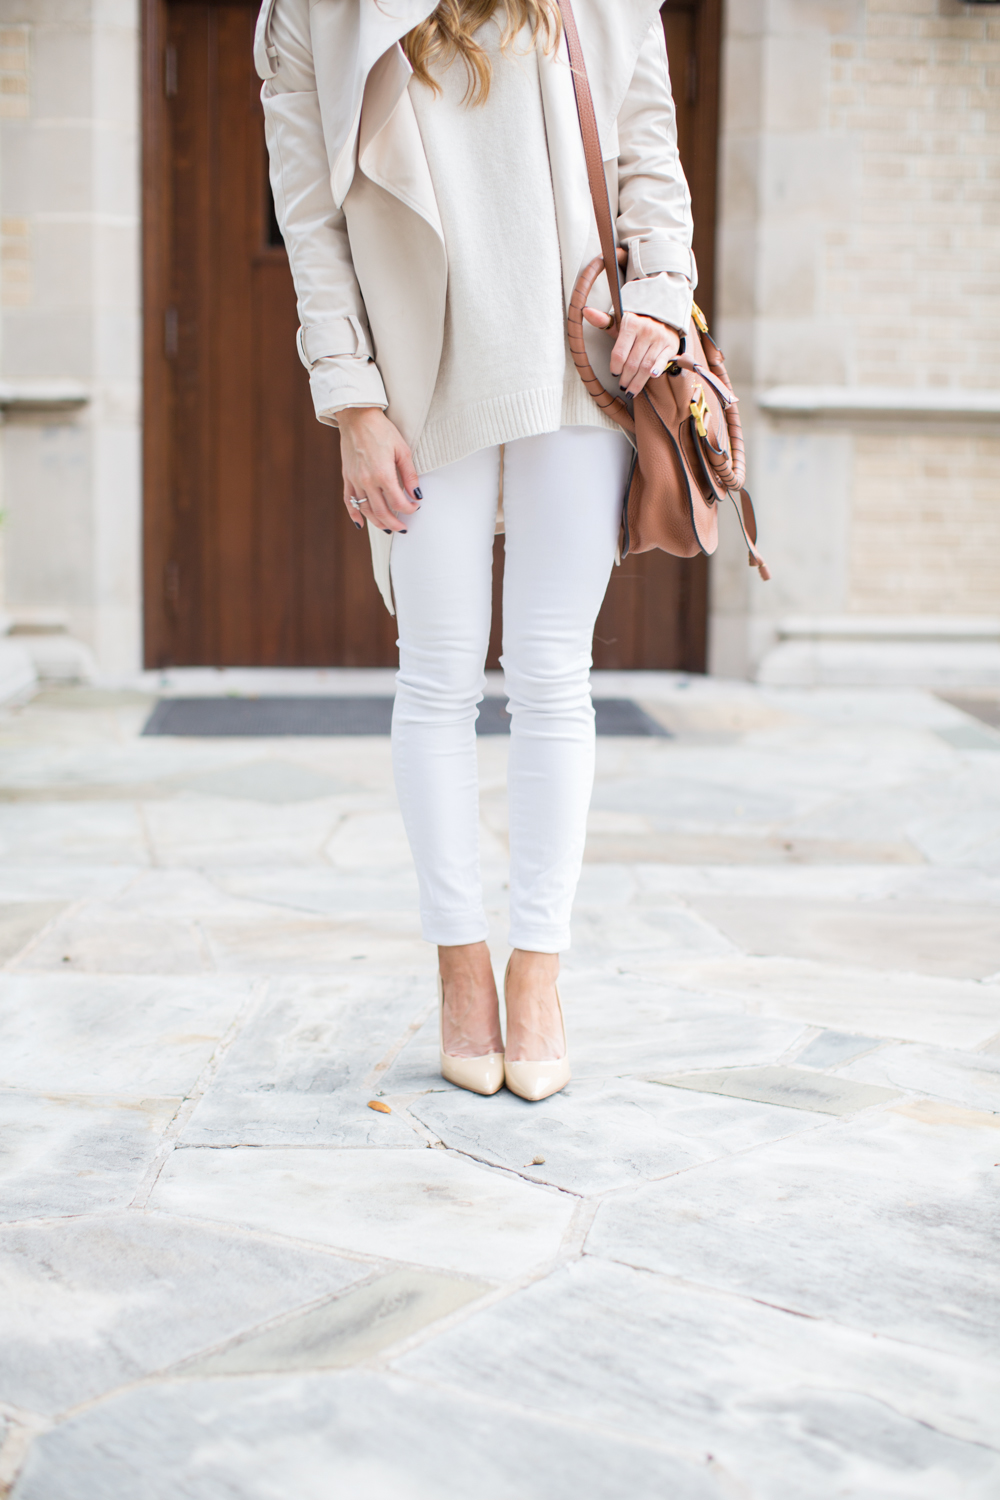 Winter white outfits 2019 - tips for how to wear white in the Winter